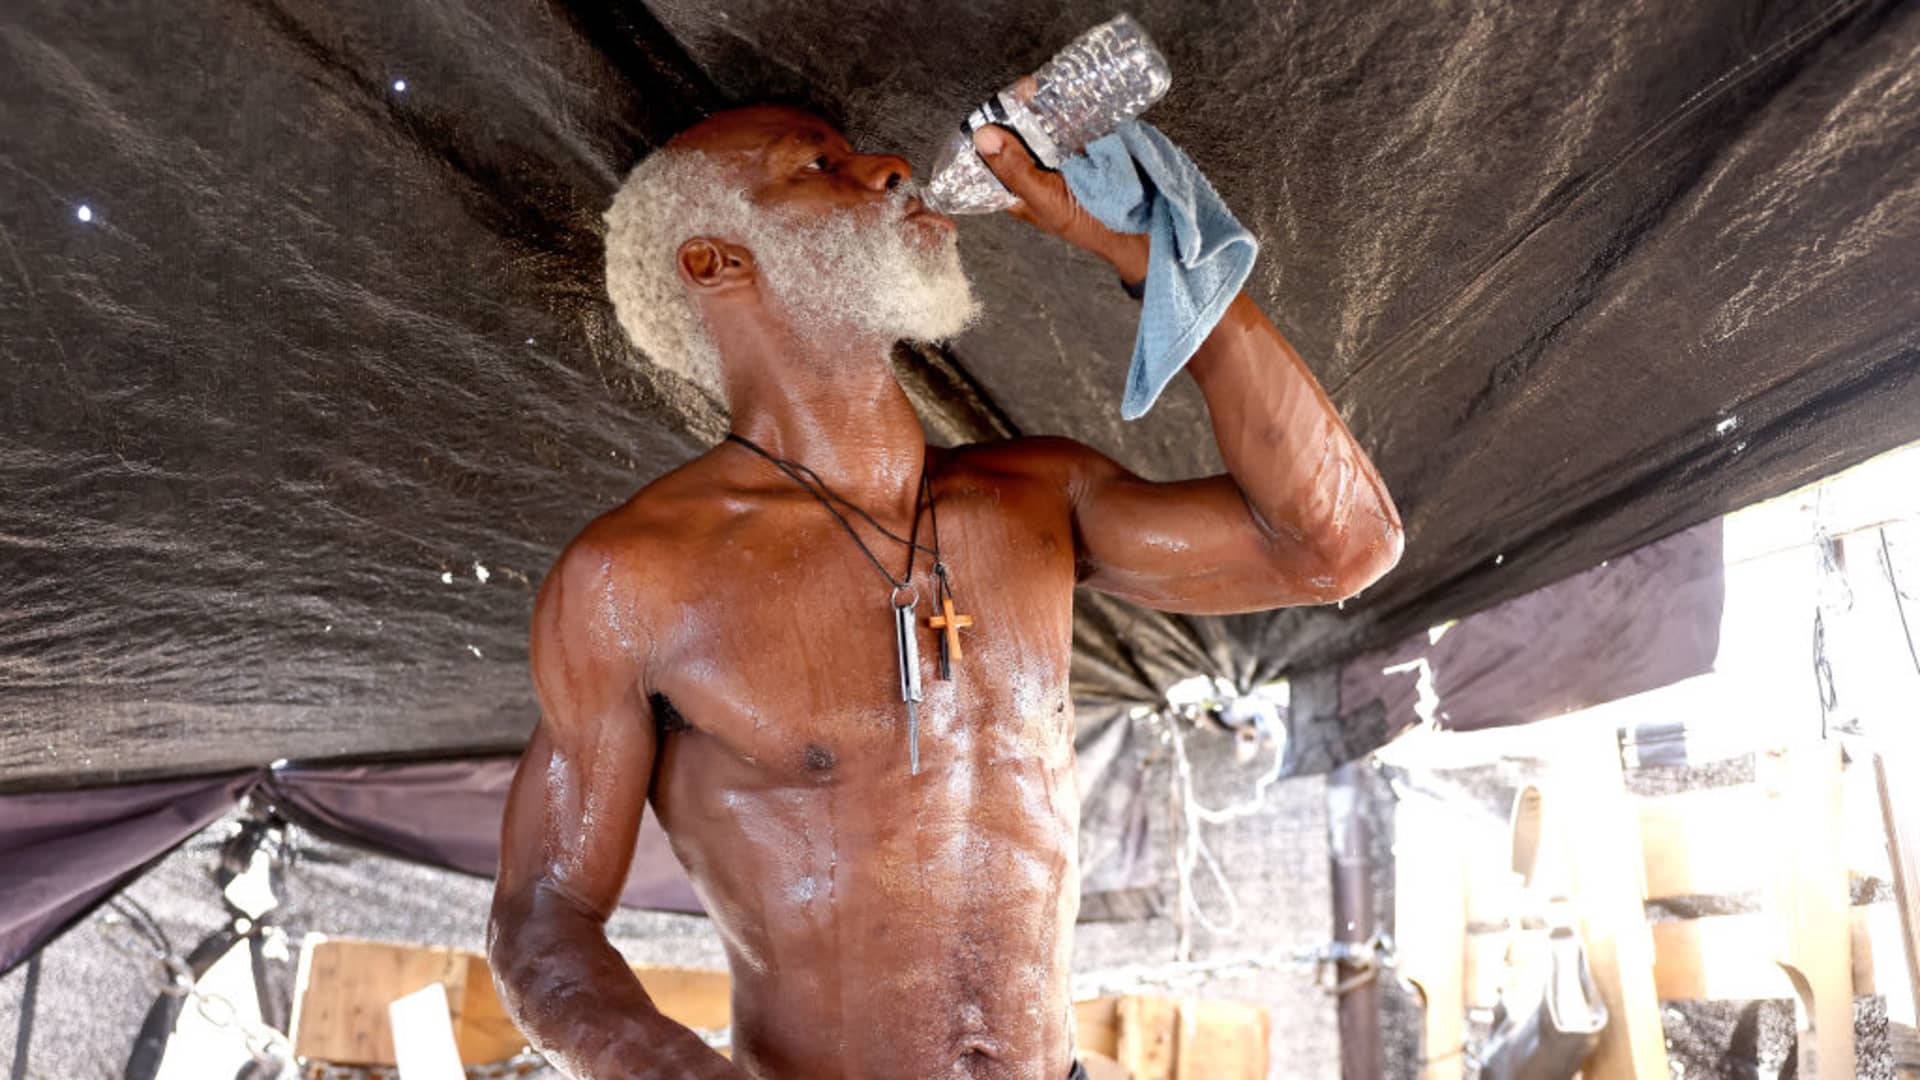 Rick White drinks water while cooling down in his tent in a section of the 'The Zone', Phoenix's largest homeless encampment, amid the city's worst heat wave on record on July 25, 2023 in Phoenix, Arizona. White said, 'The extreme heat is one thing, but the direct sun, it drains you quick...That sun will have you delirious.' While Phoenix endures periods of extreme heat every year, today is predicted to mark the 26th straight day of temperatures reaching 110 degrees or higher, a new record amid a long duration heat wave in the Southwest. Extreme heat kills more people than hurricanes, floods and tornadoes combined in an average year in the U.S. Unhoused people are at an especially high risk of heat-related illness or death.